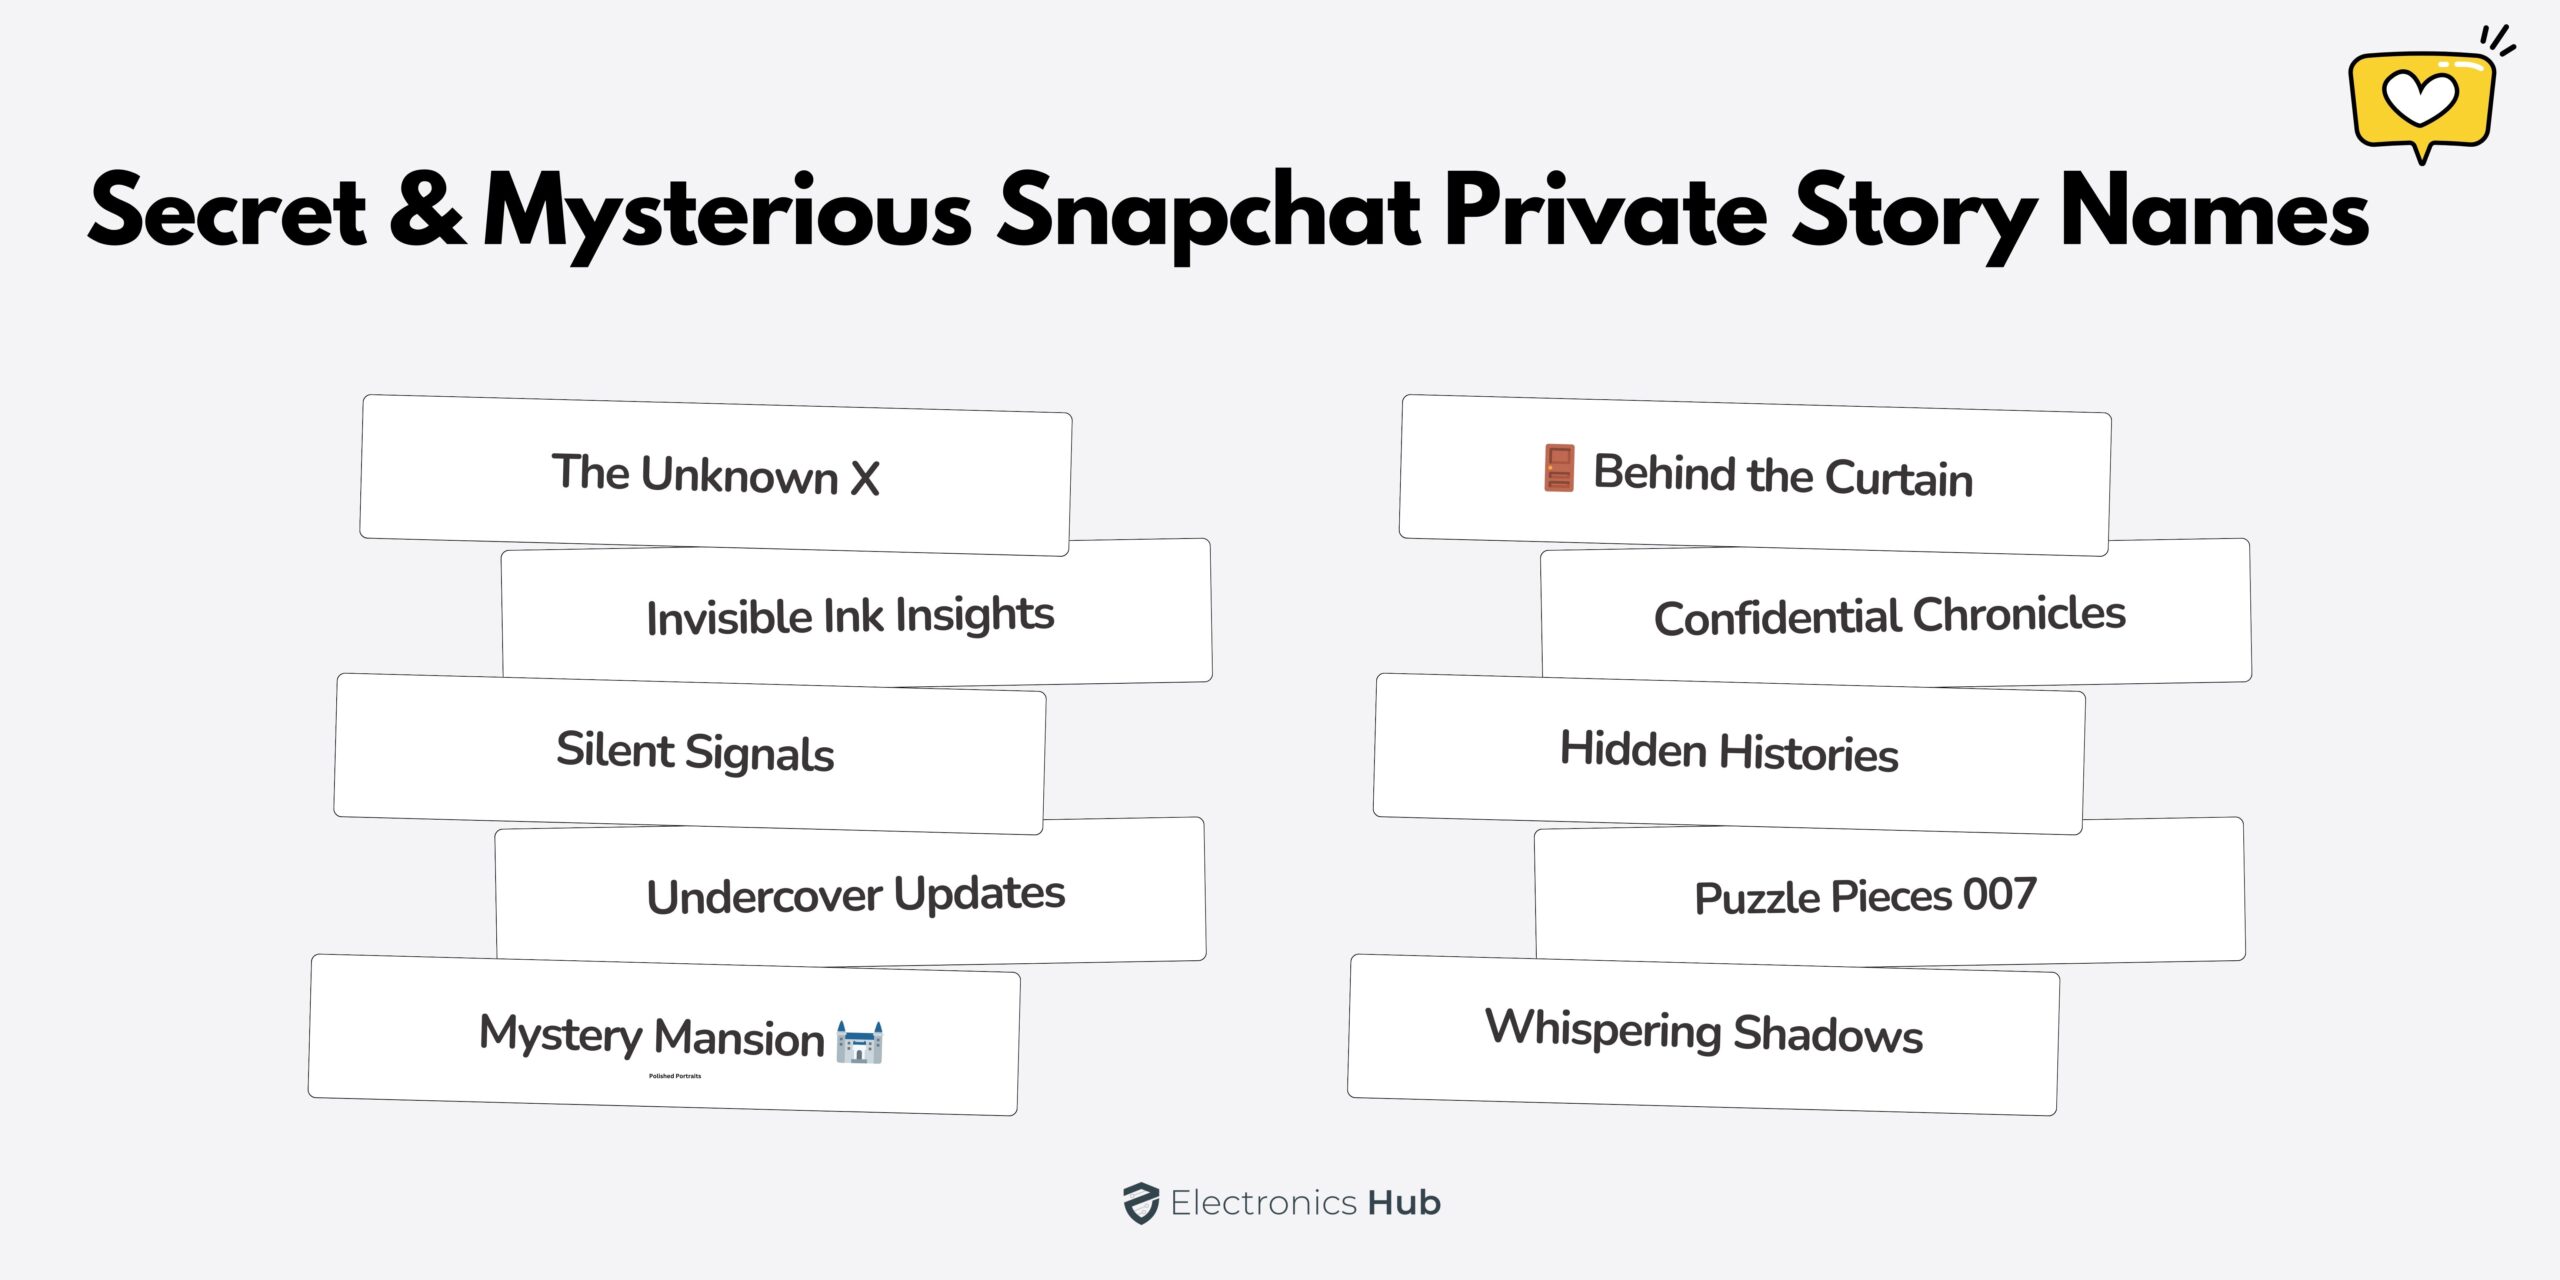 Secret & Mysterious Snapchat Private Story Names